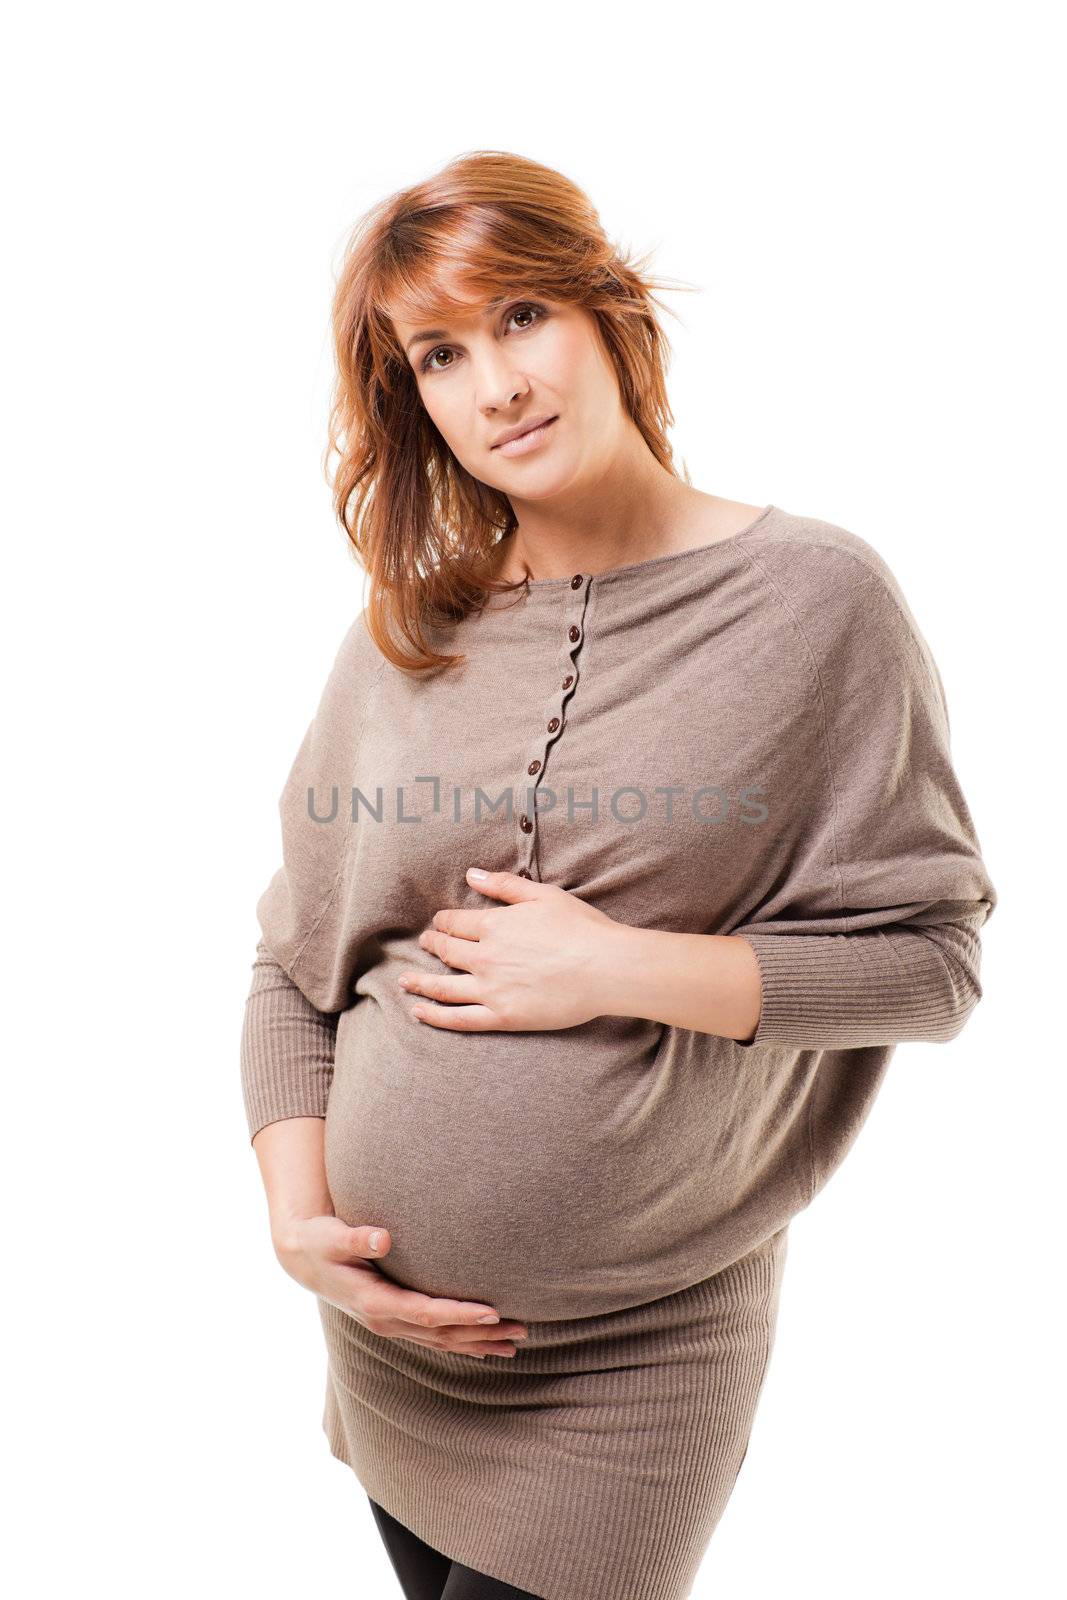 Young beautiful pregnant female standing on white background holding her tummy